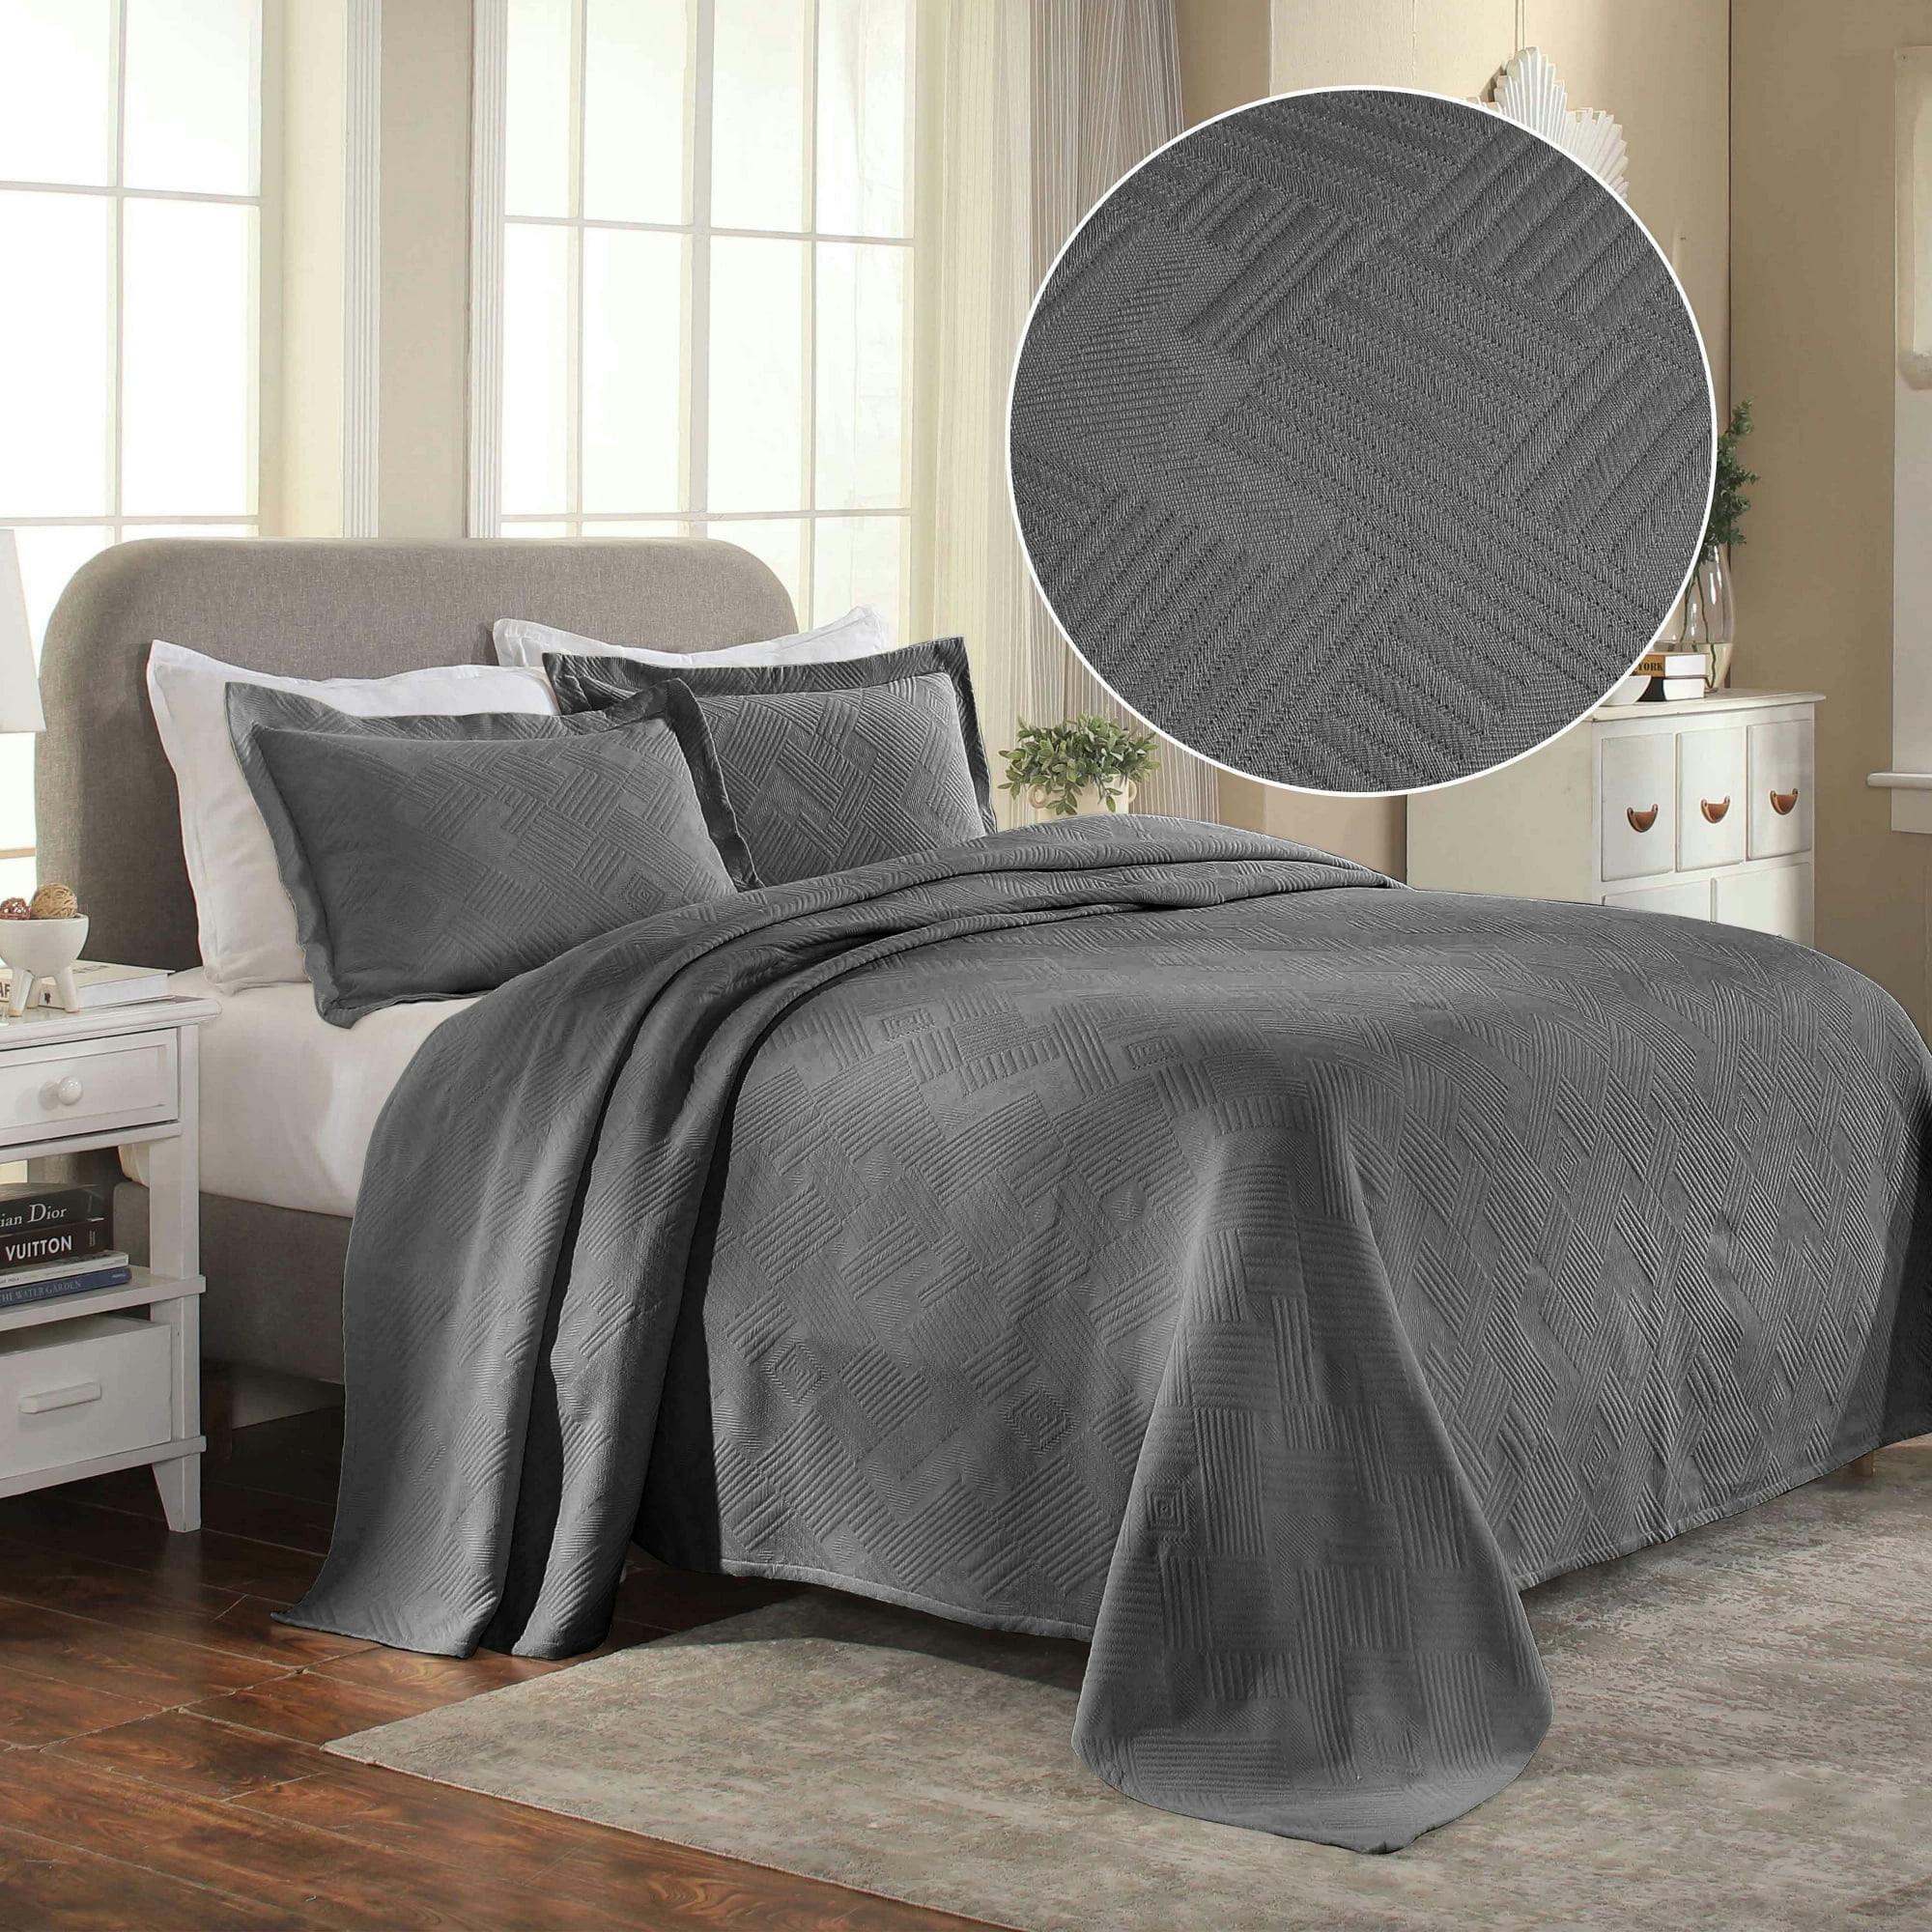 Ivory Cotton King Bedspread Set with Geometric Patterns